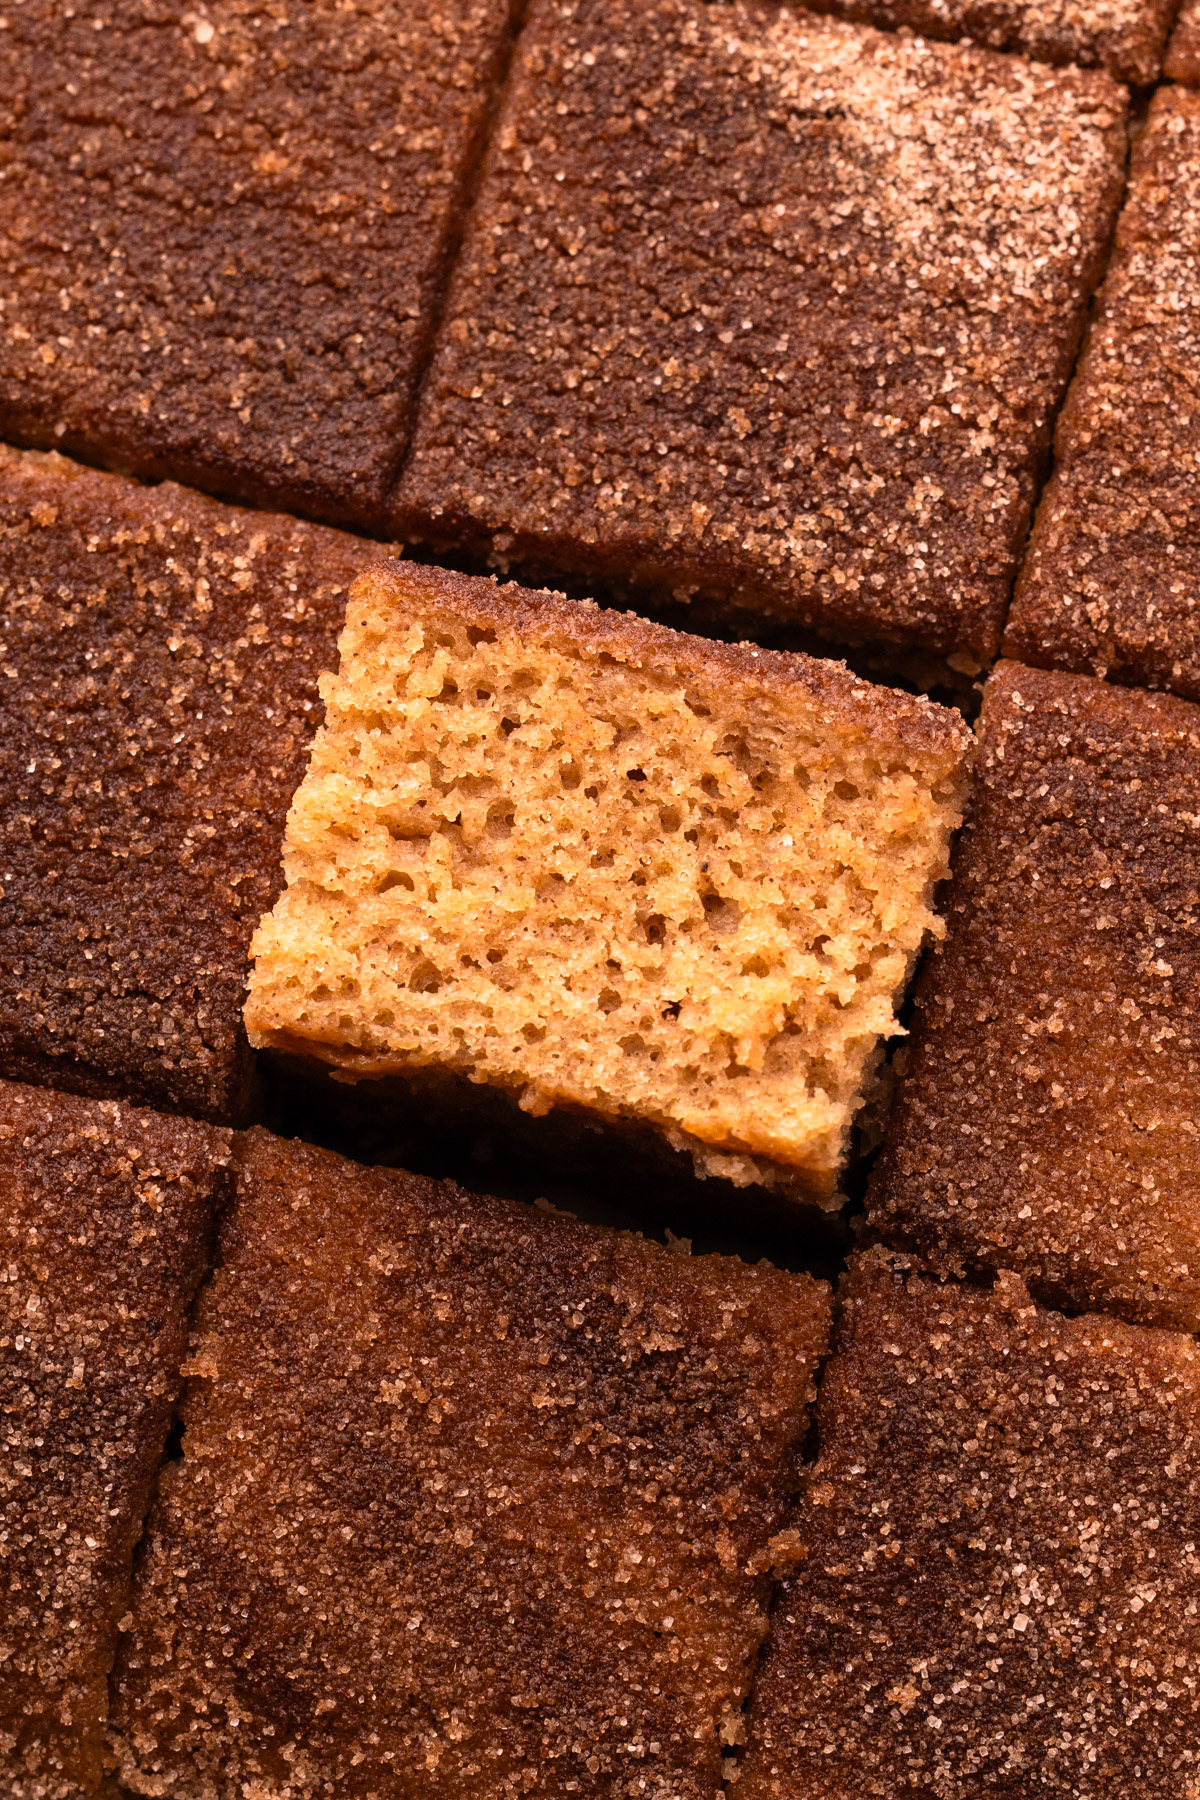 Square slices of baked cake, with one slice turned on its side to see the fluffy interior.